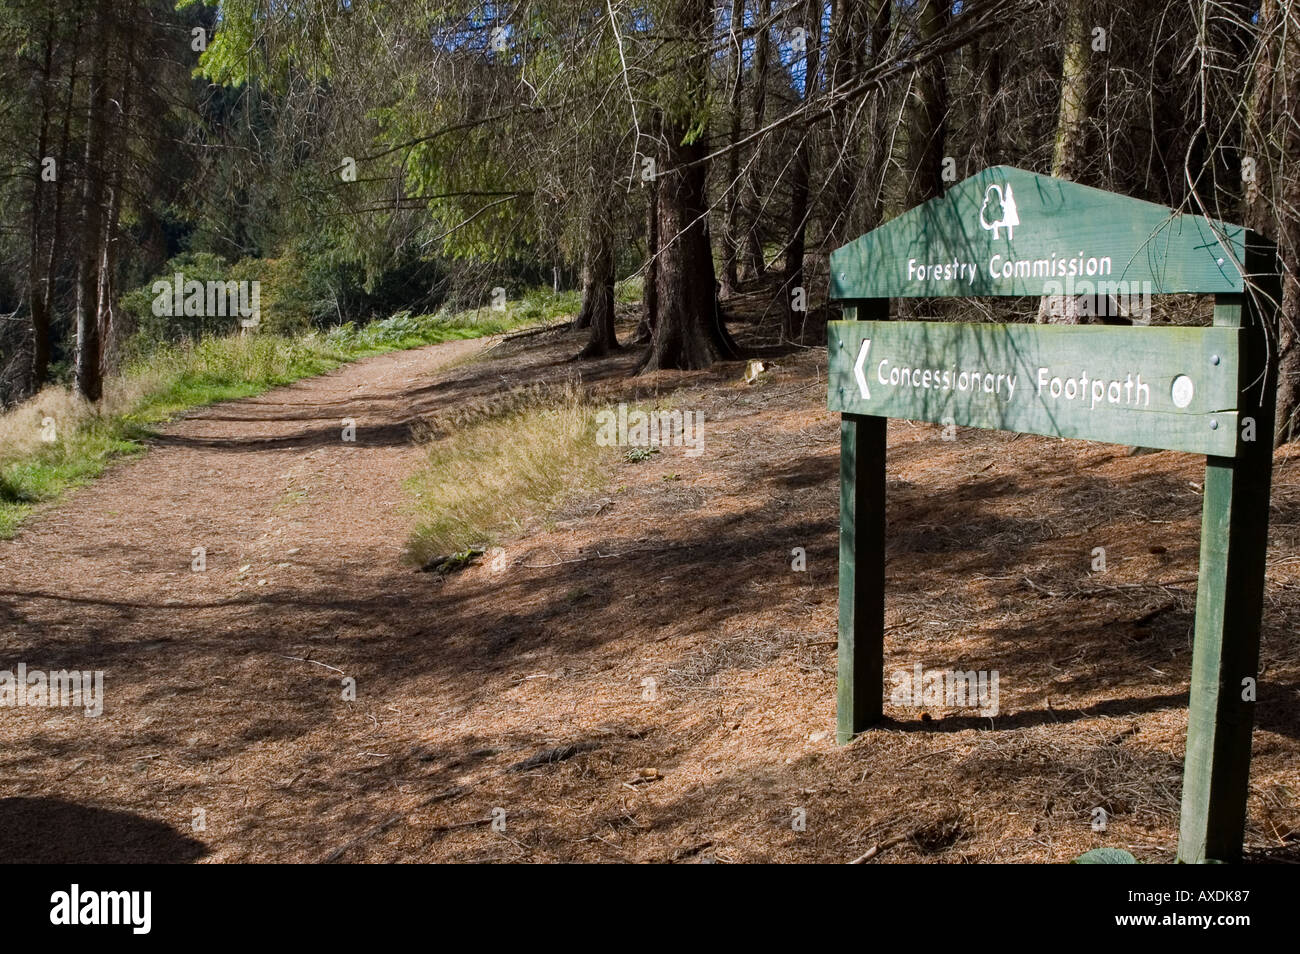 Footpath and Forestry Commision signage Derwent Water, Derbyshire Stock Photo